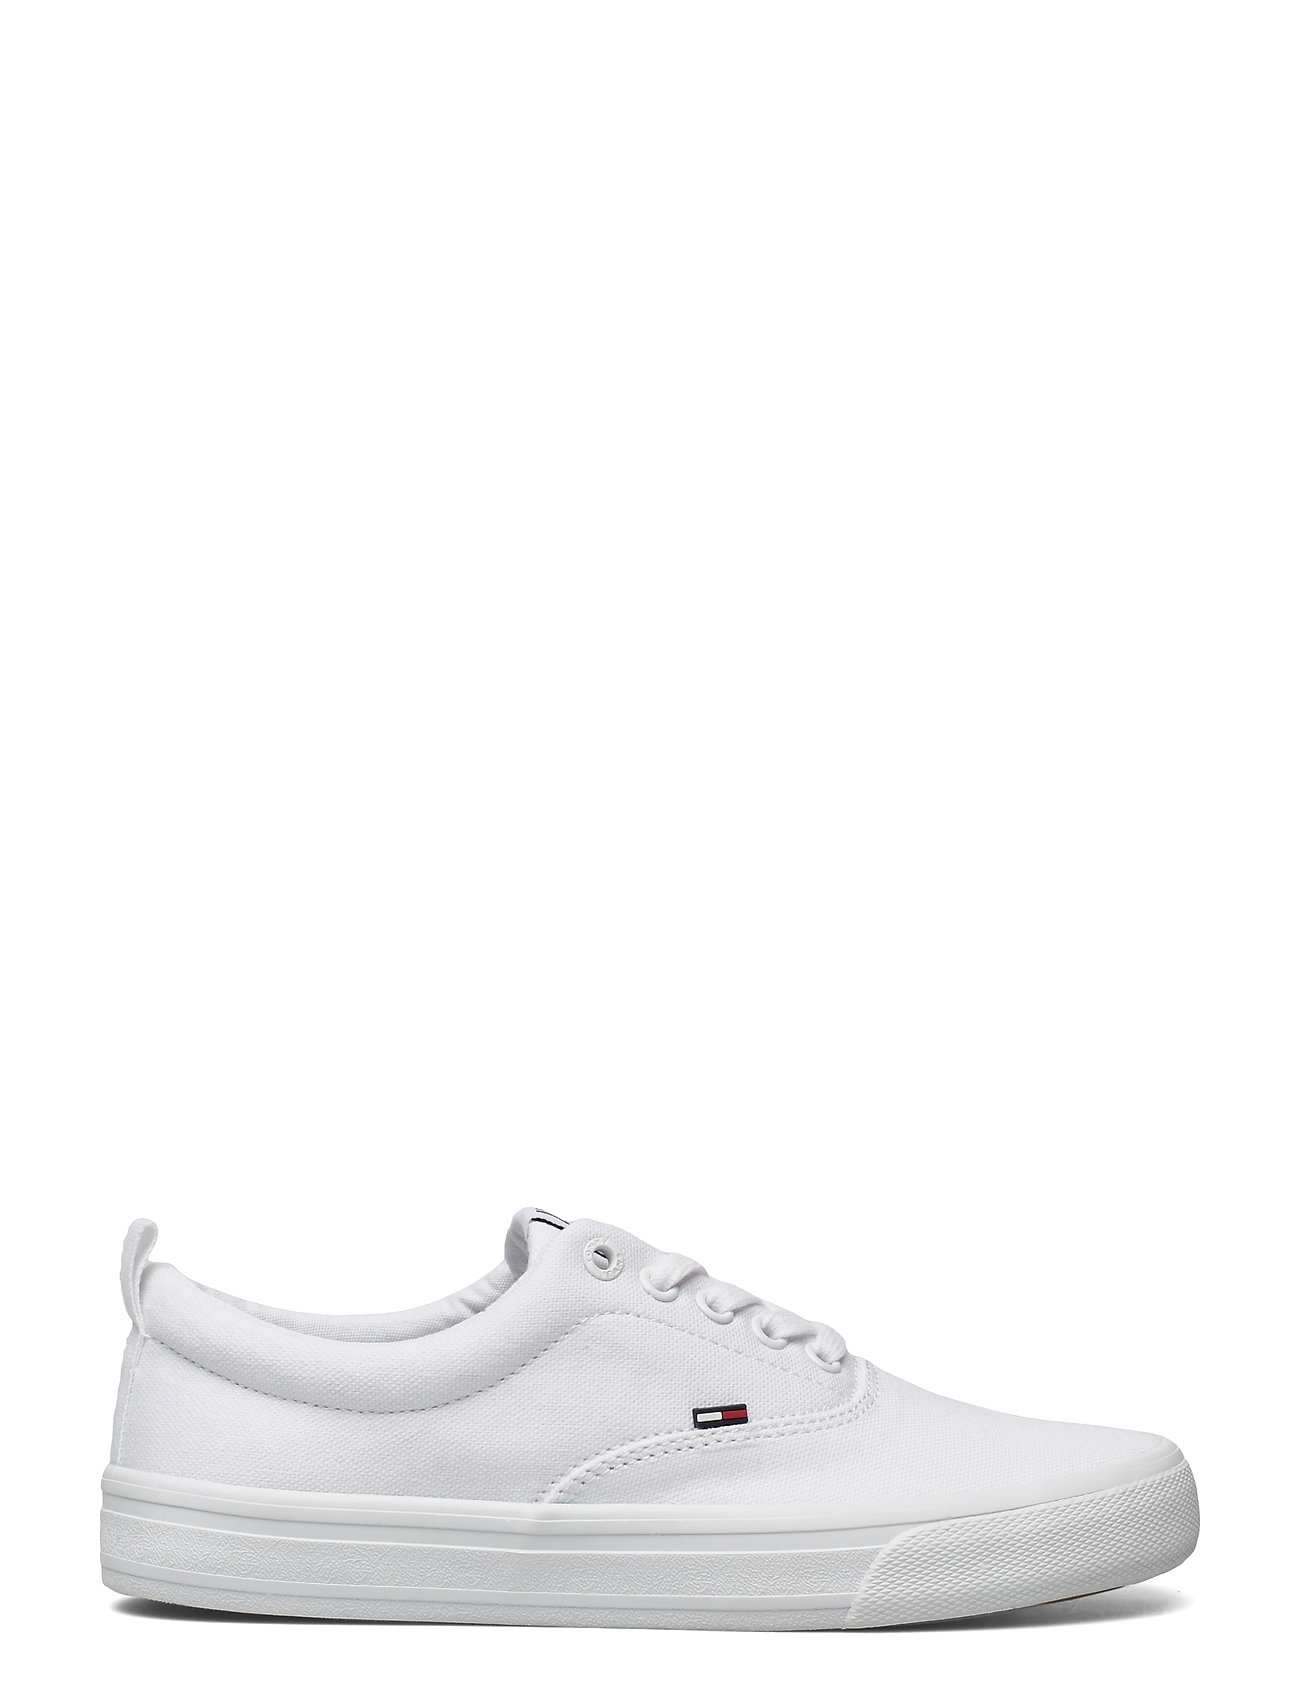 Tommy Hilfiger - WMN CLASSIC TOMMY JEANS SNEAKER - sneakers med lavt skaft - white - 1